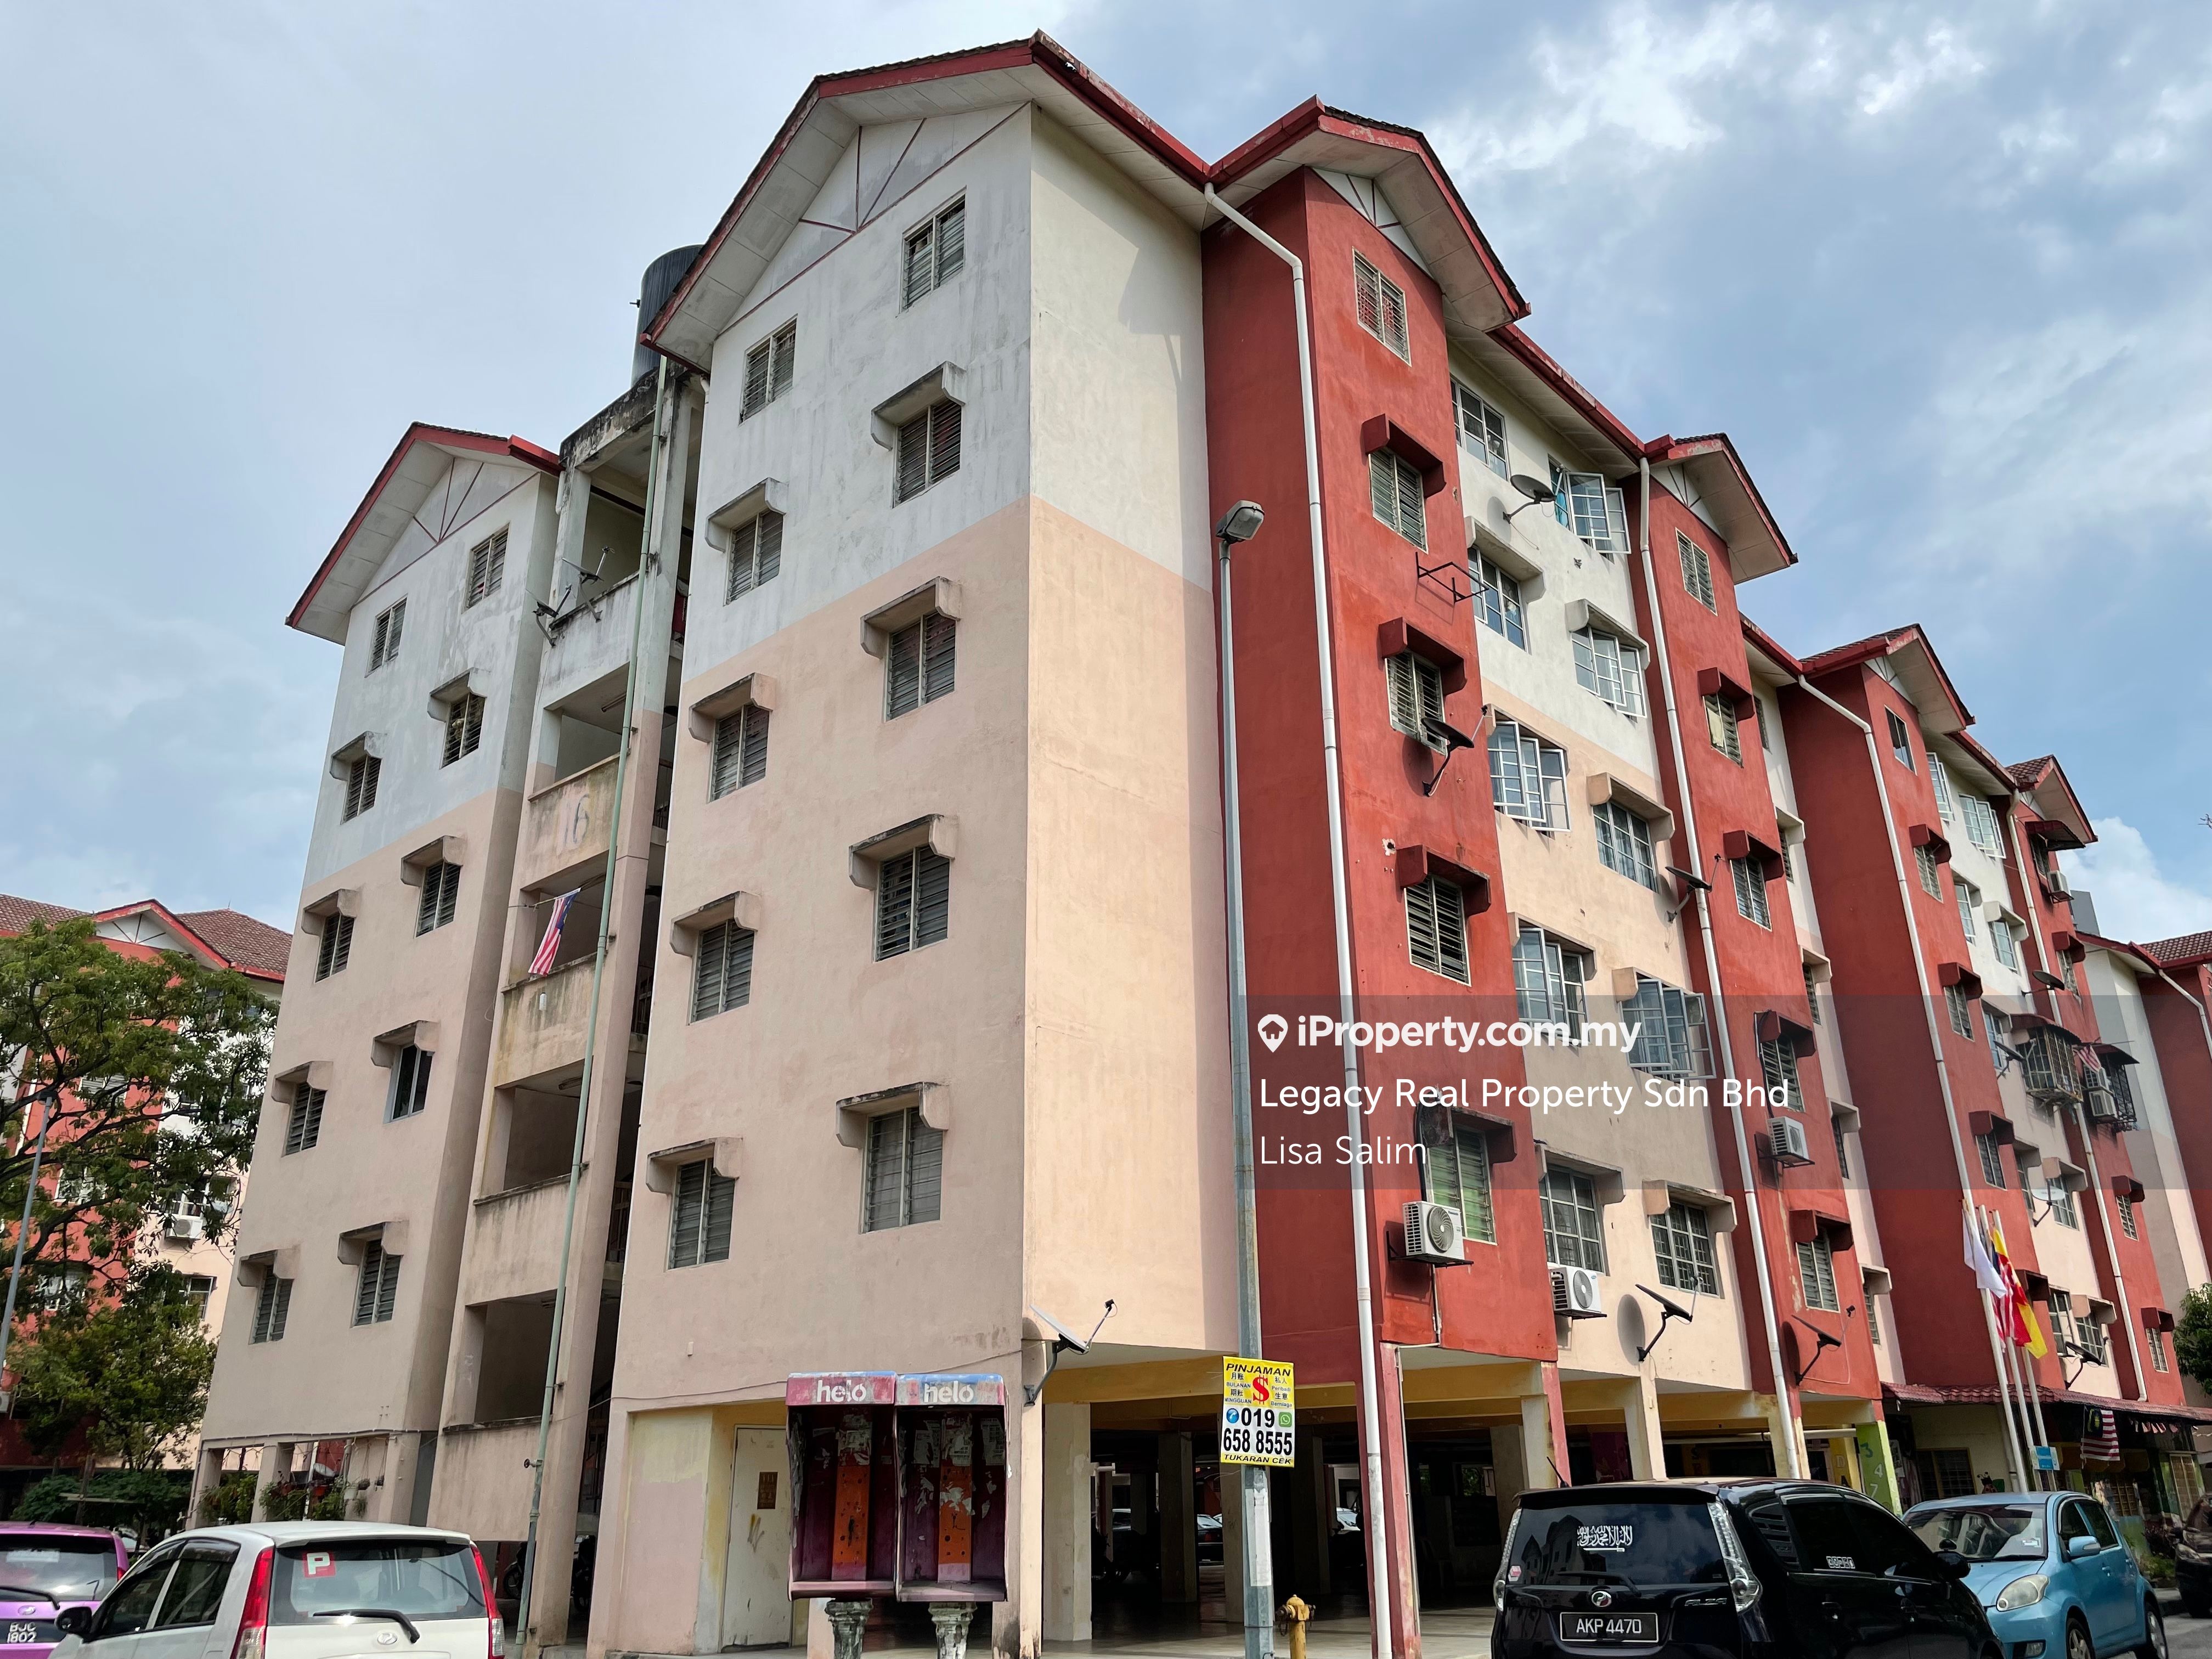 Flat Pkns Section 7 Flat 3 Bedrooms For Sale In Shah Alam Selangor Iproperty Com My